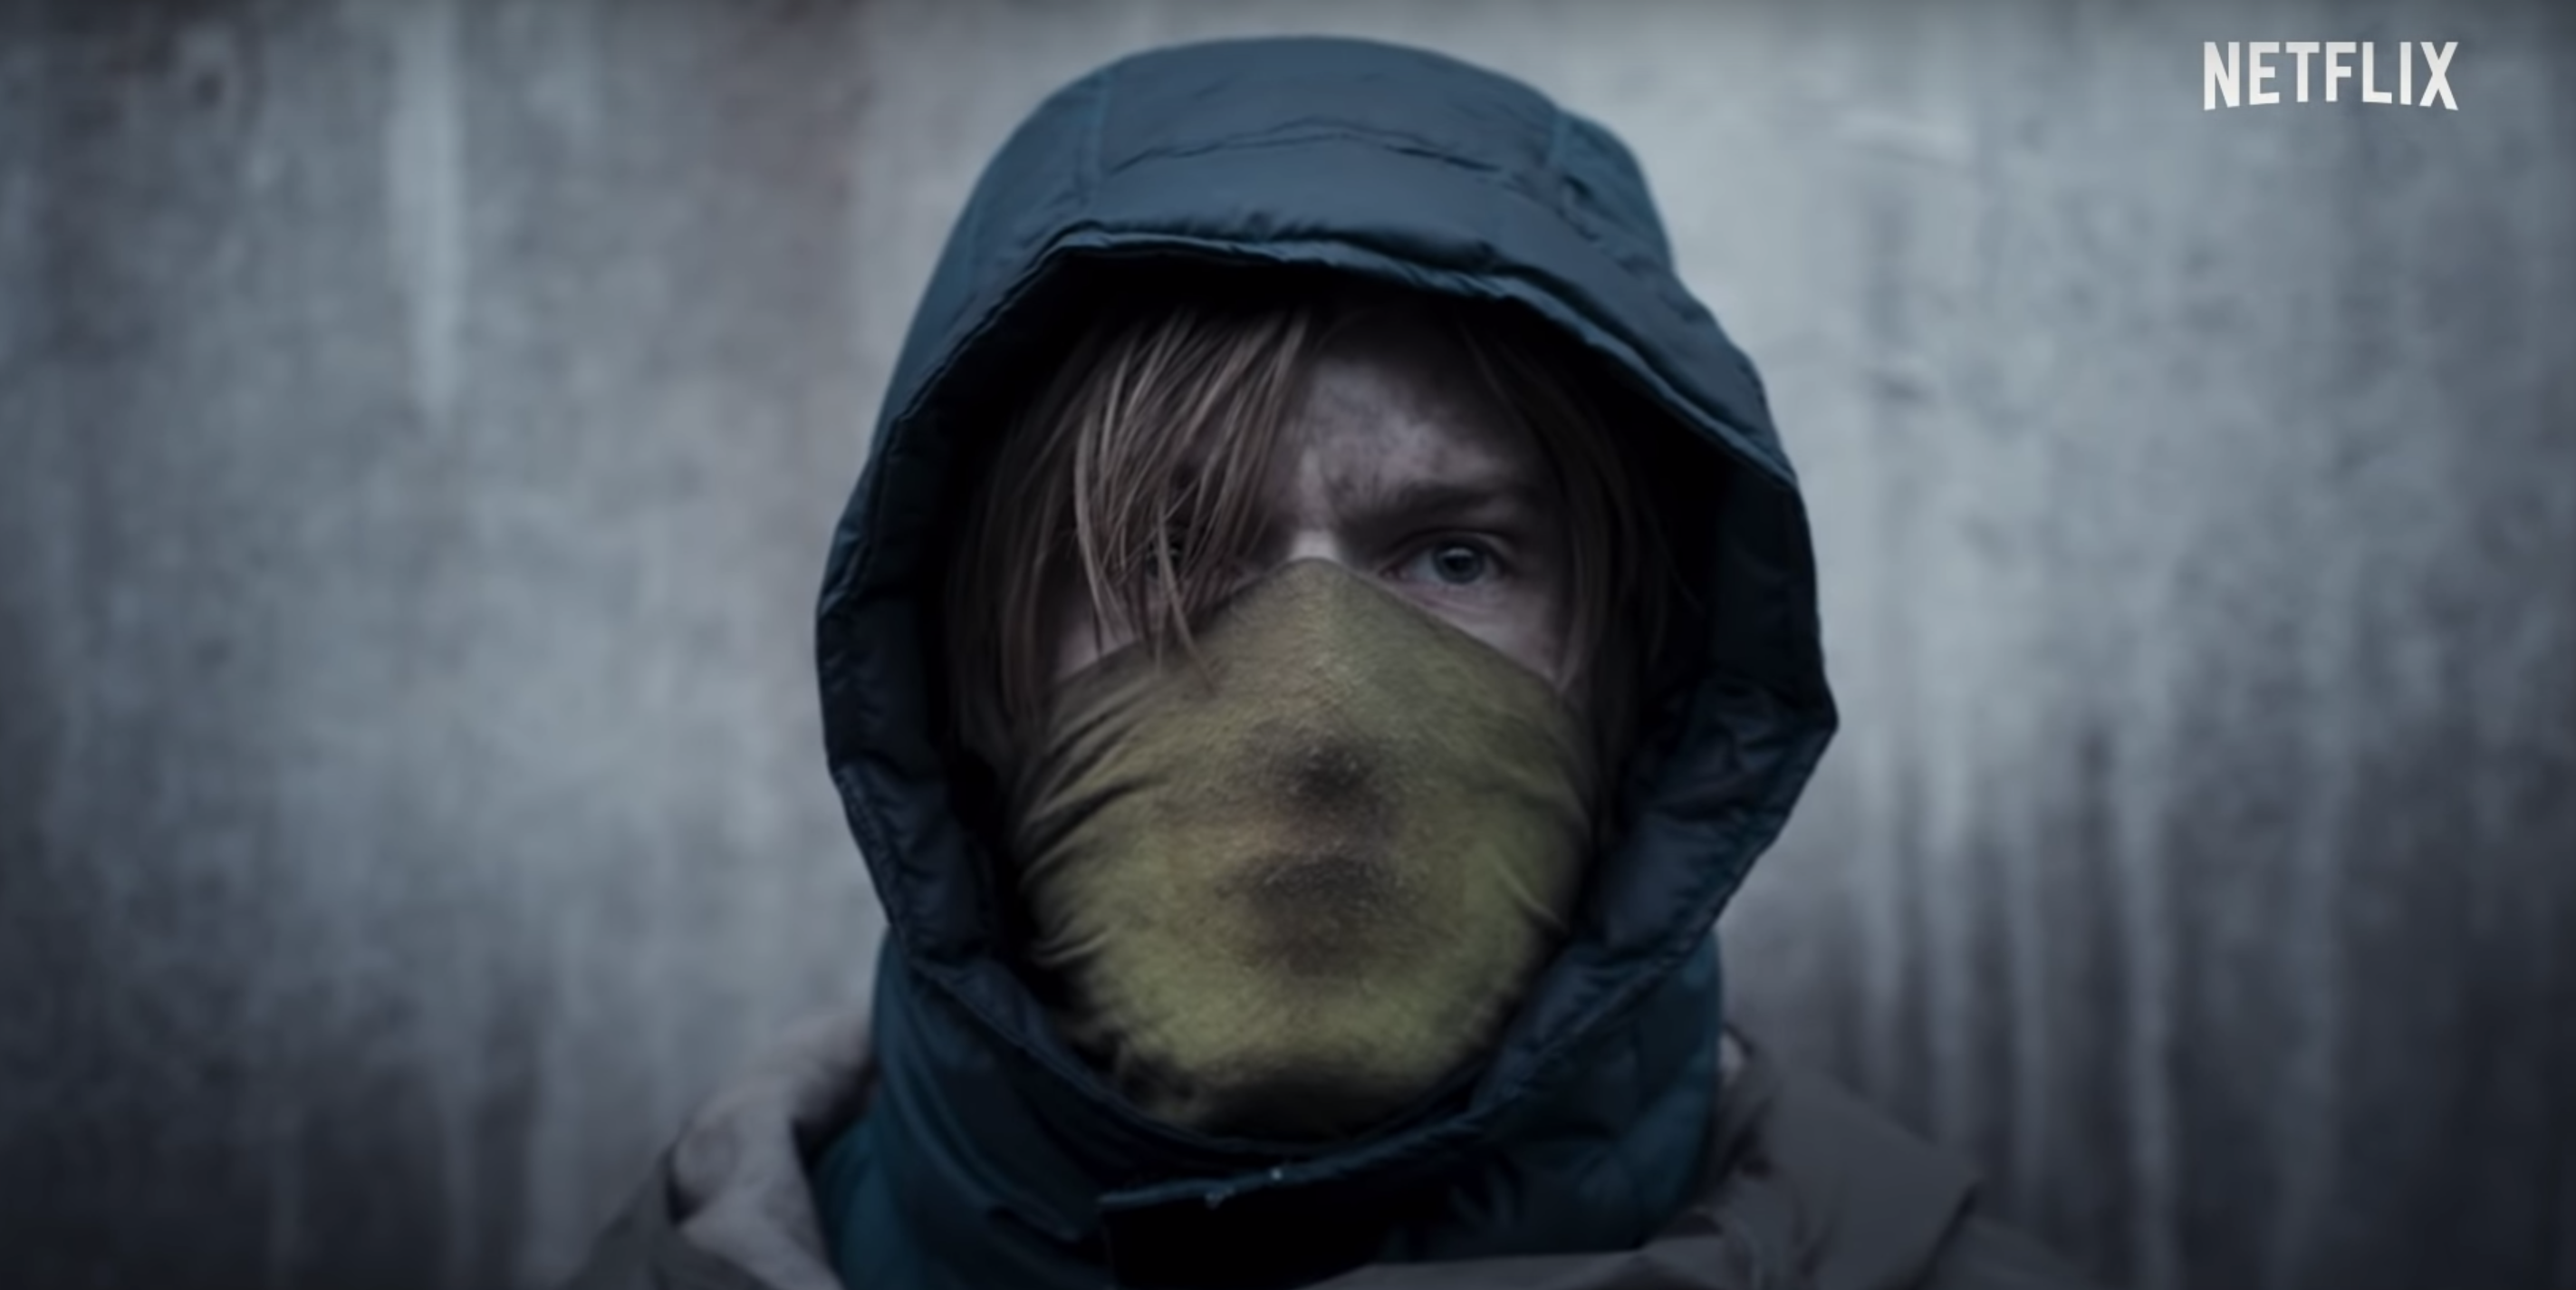 Jonas, in Netflix's Dark, wearing a yellow mask after the apocalypse.